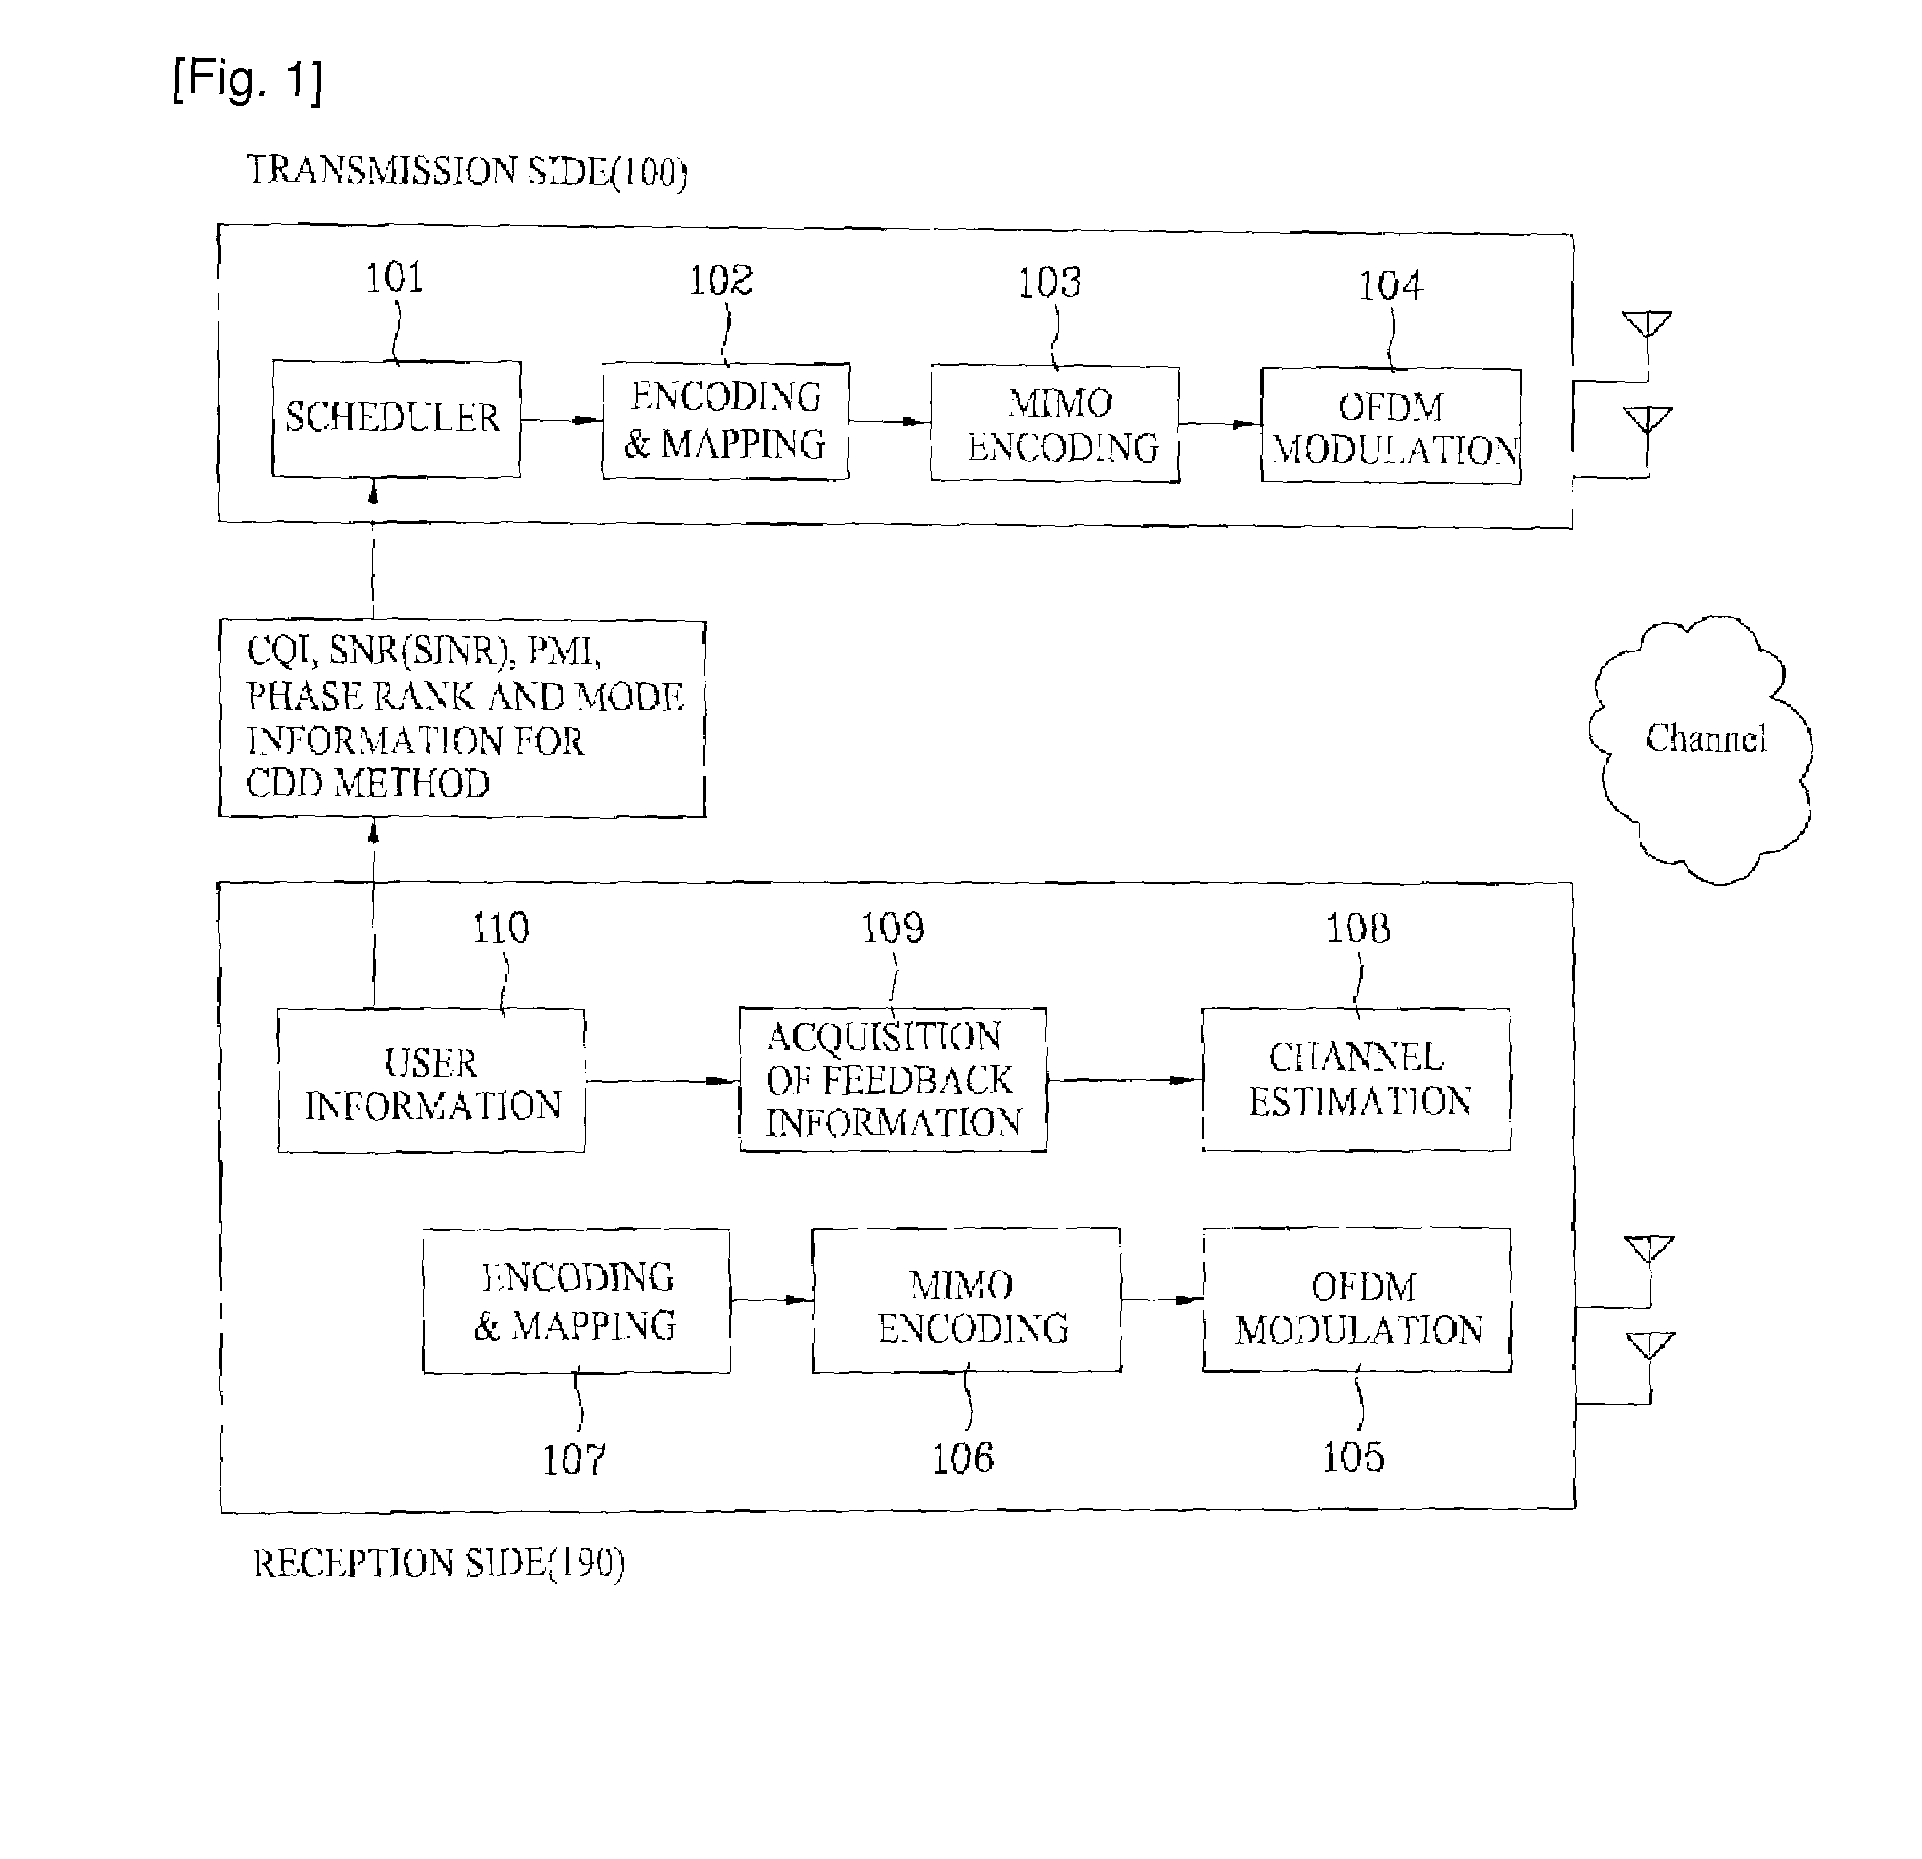 Method for transmitting and receiving feedback information